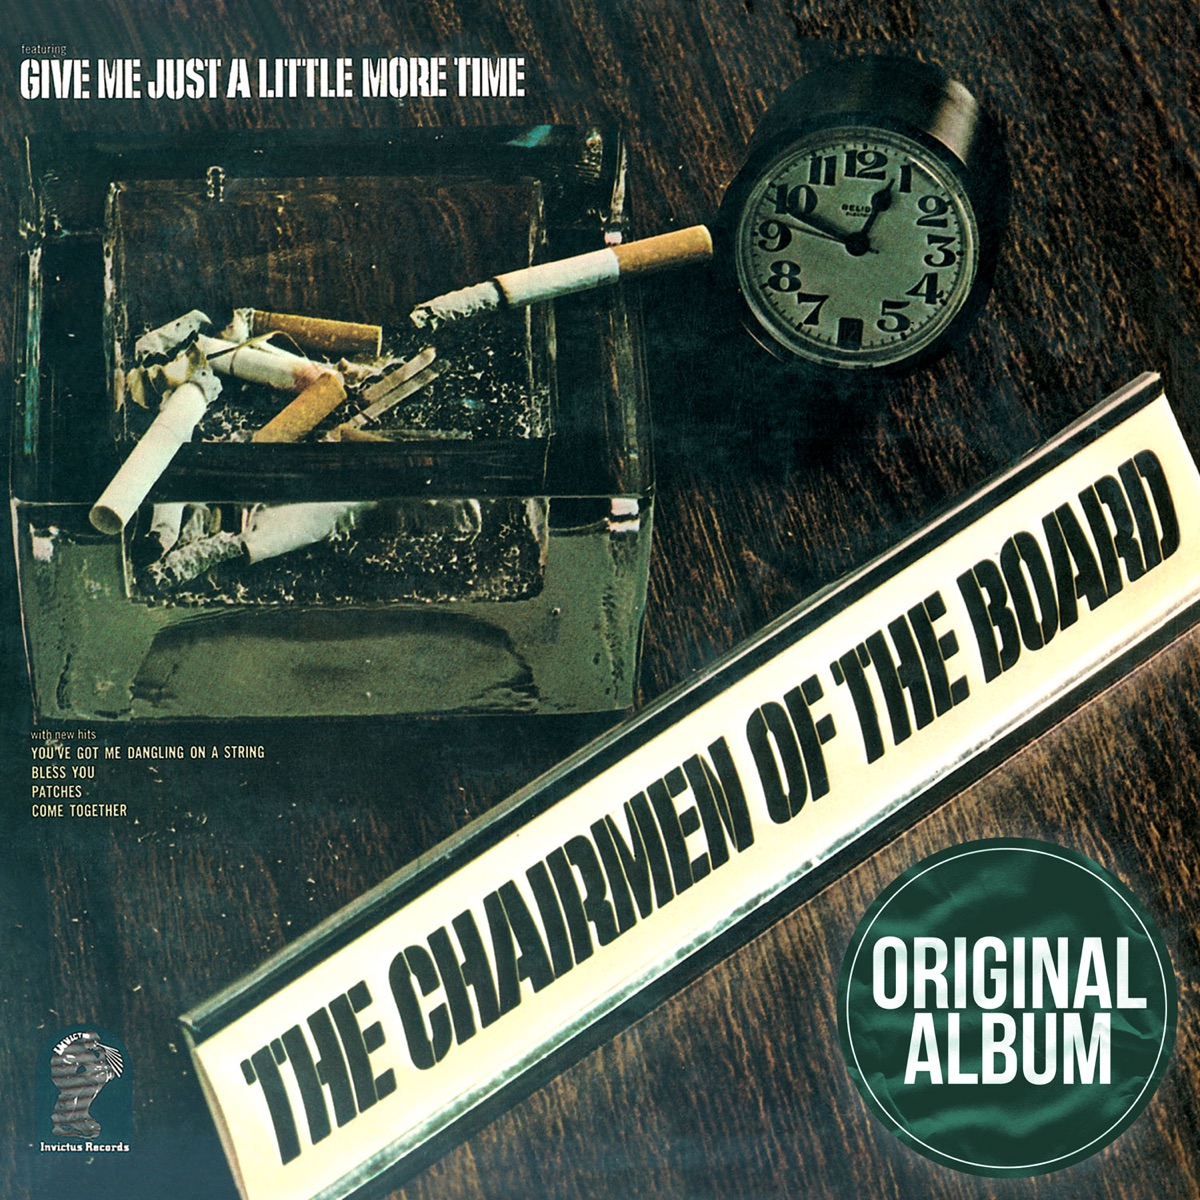 Me Just a More Time by Chairmen of the Board on Apple Music